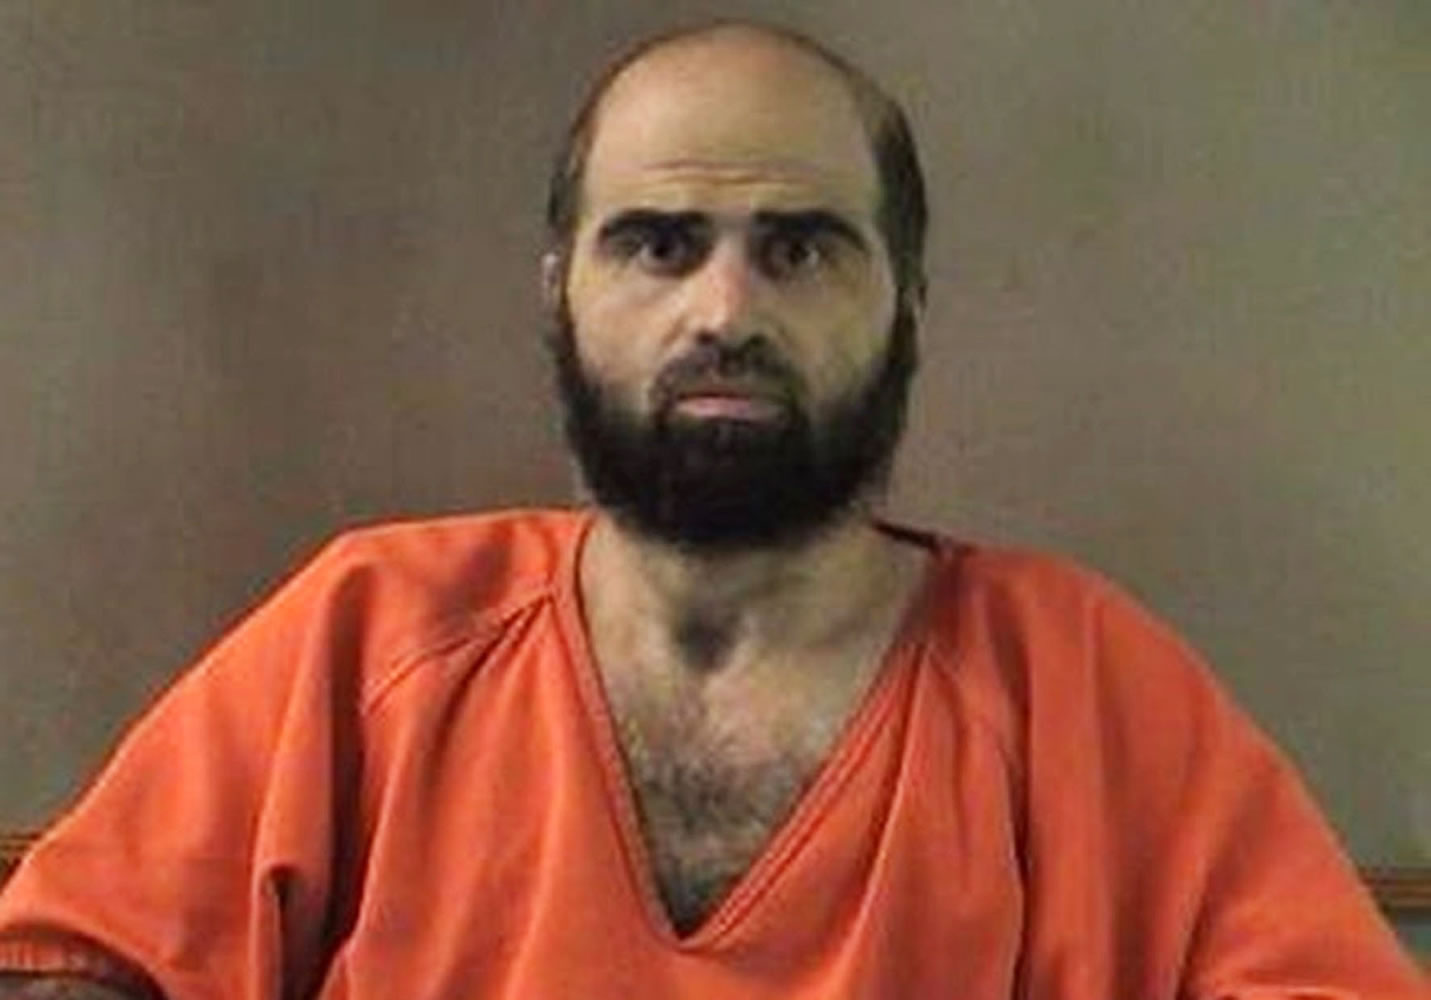 Nidal Hasan is charged in the 2009 shooting rampage at Fort Hood that left 13 dead and more than 30 others wounded.